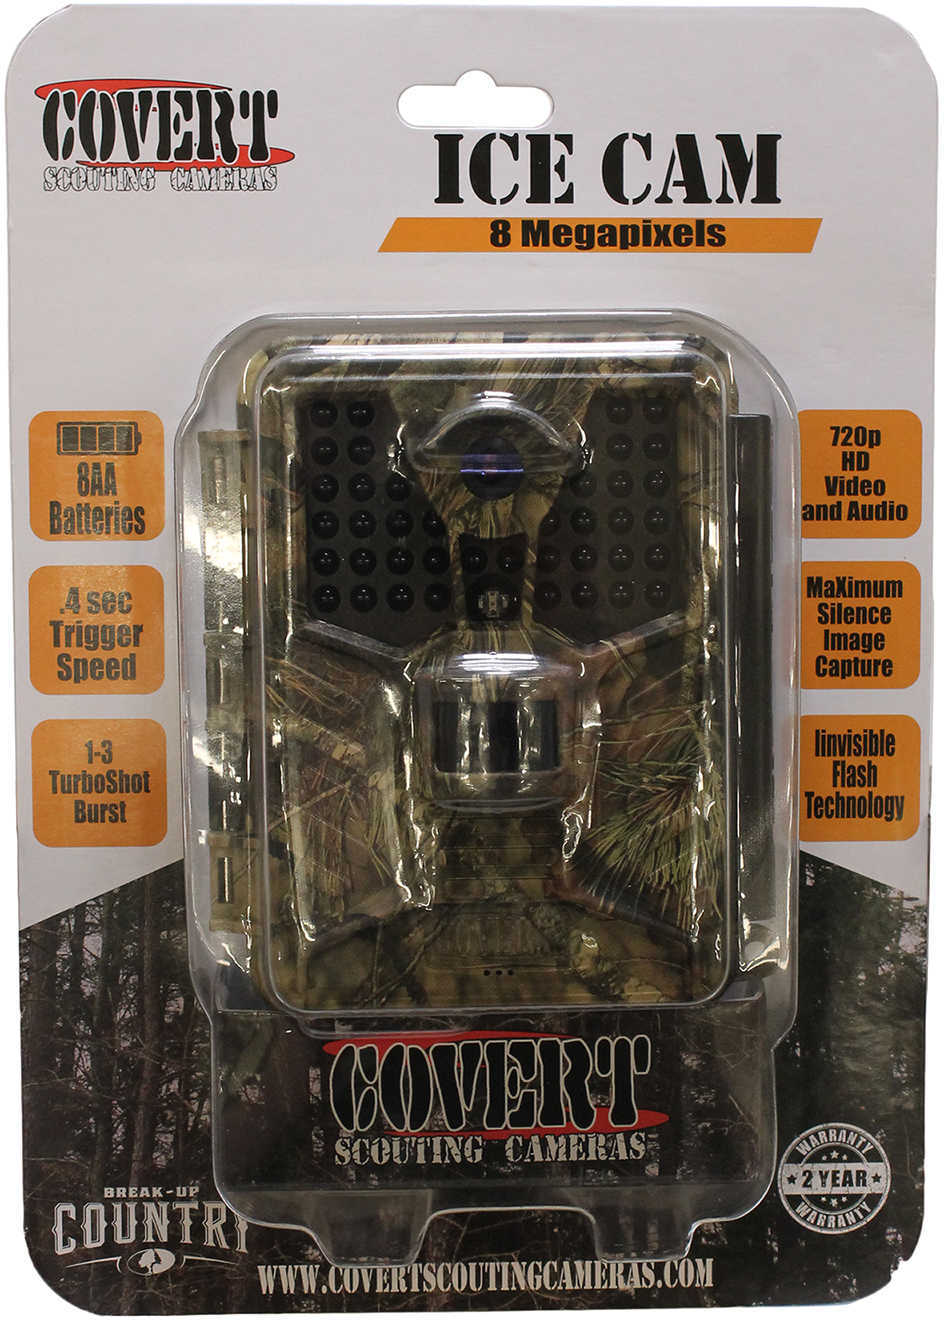 Covert Scouting Cameras 5489 Ice Cam 720p HD 18 MP Mossy Oak Break-Up Country